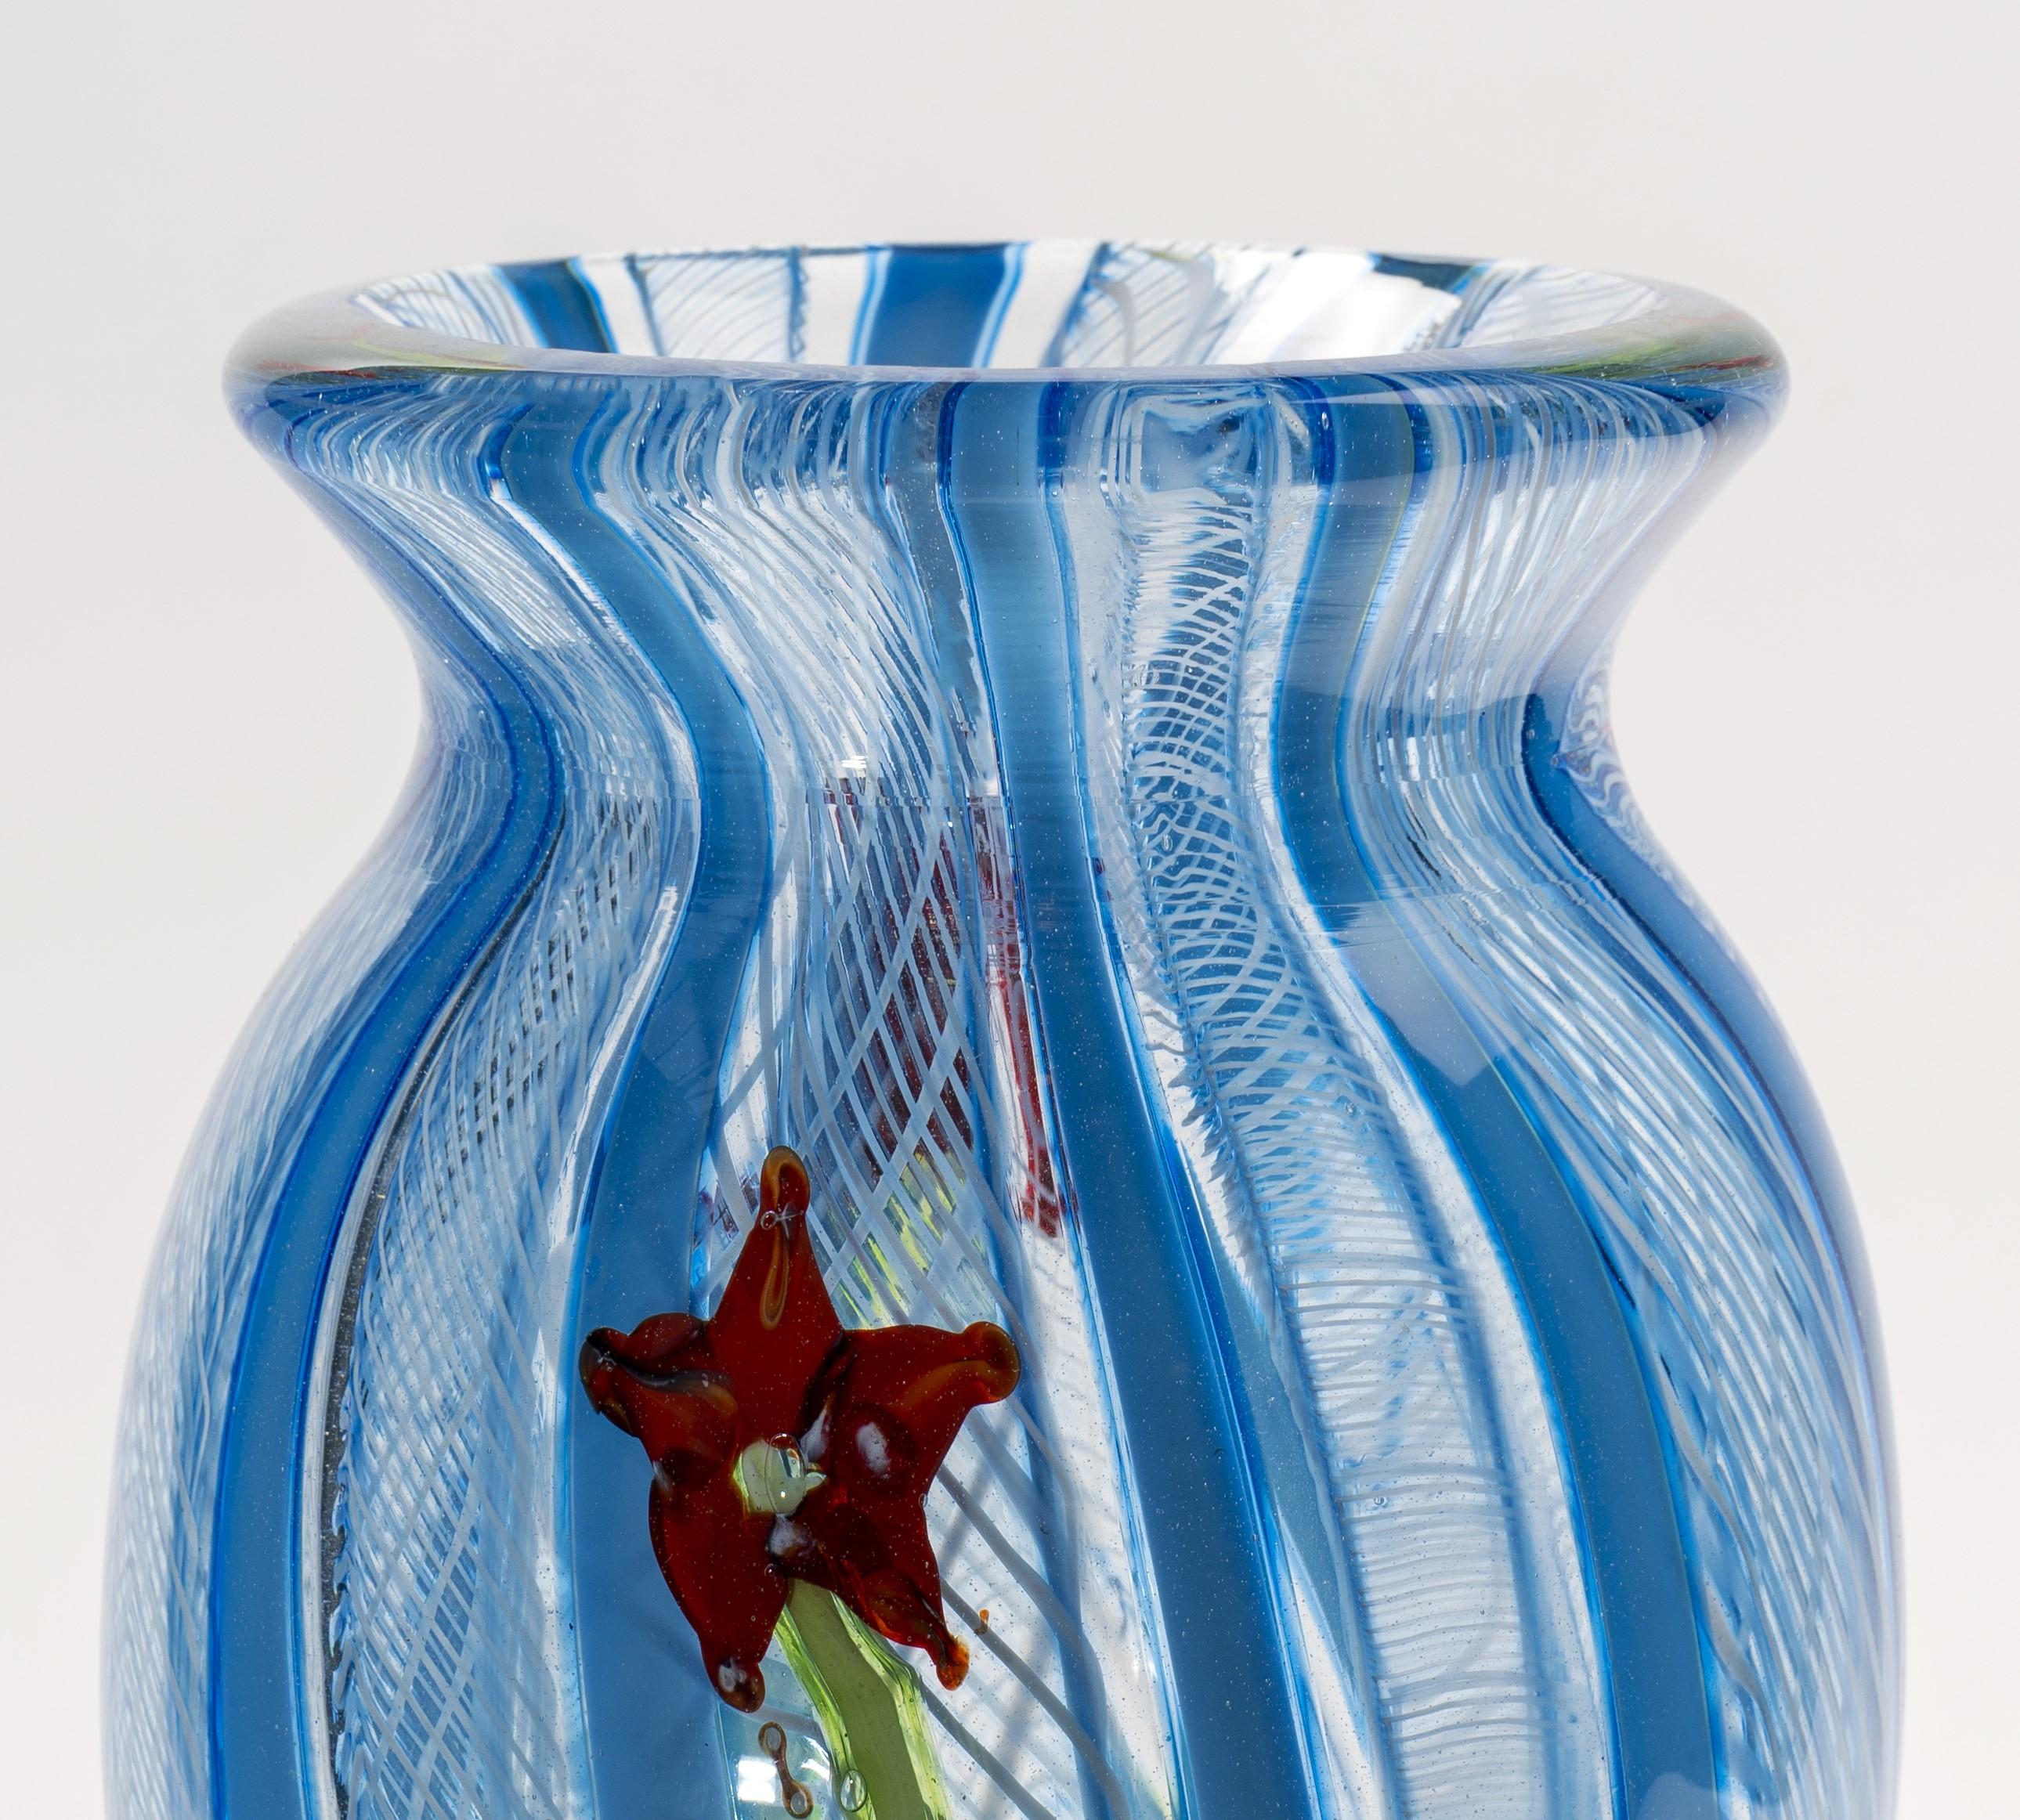 Jeremiah Jacobs, a highly skilled glassblower, has crafted a breath-taking blown glass piece that showcases his talent and creativity. This intricate artwork incorporates the zanfirico cane and filigrana cane techniques, along with a beautifully